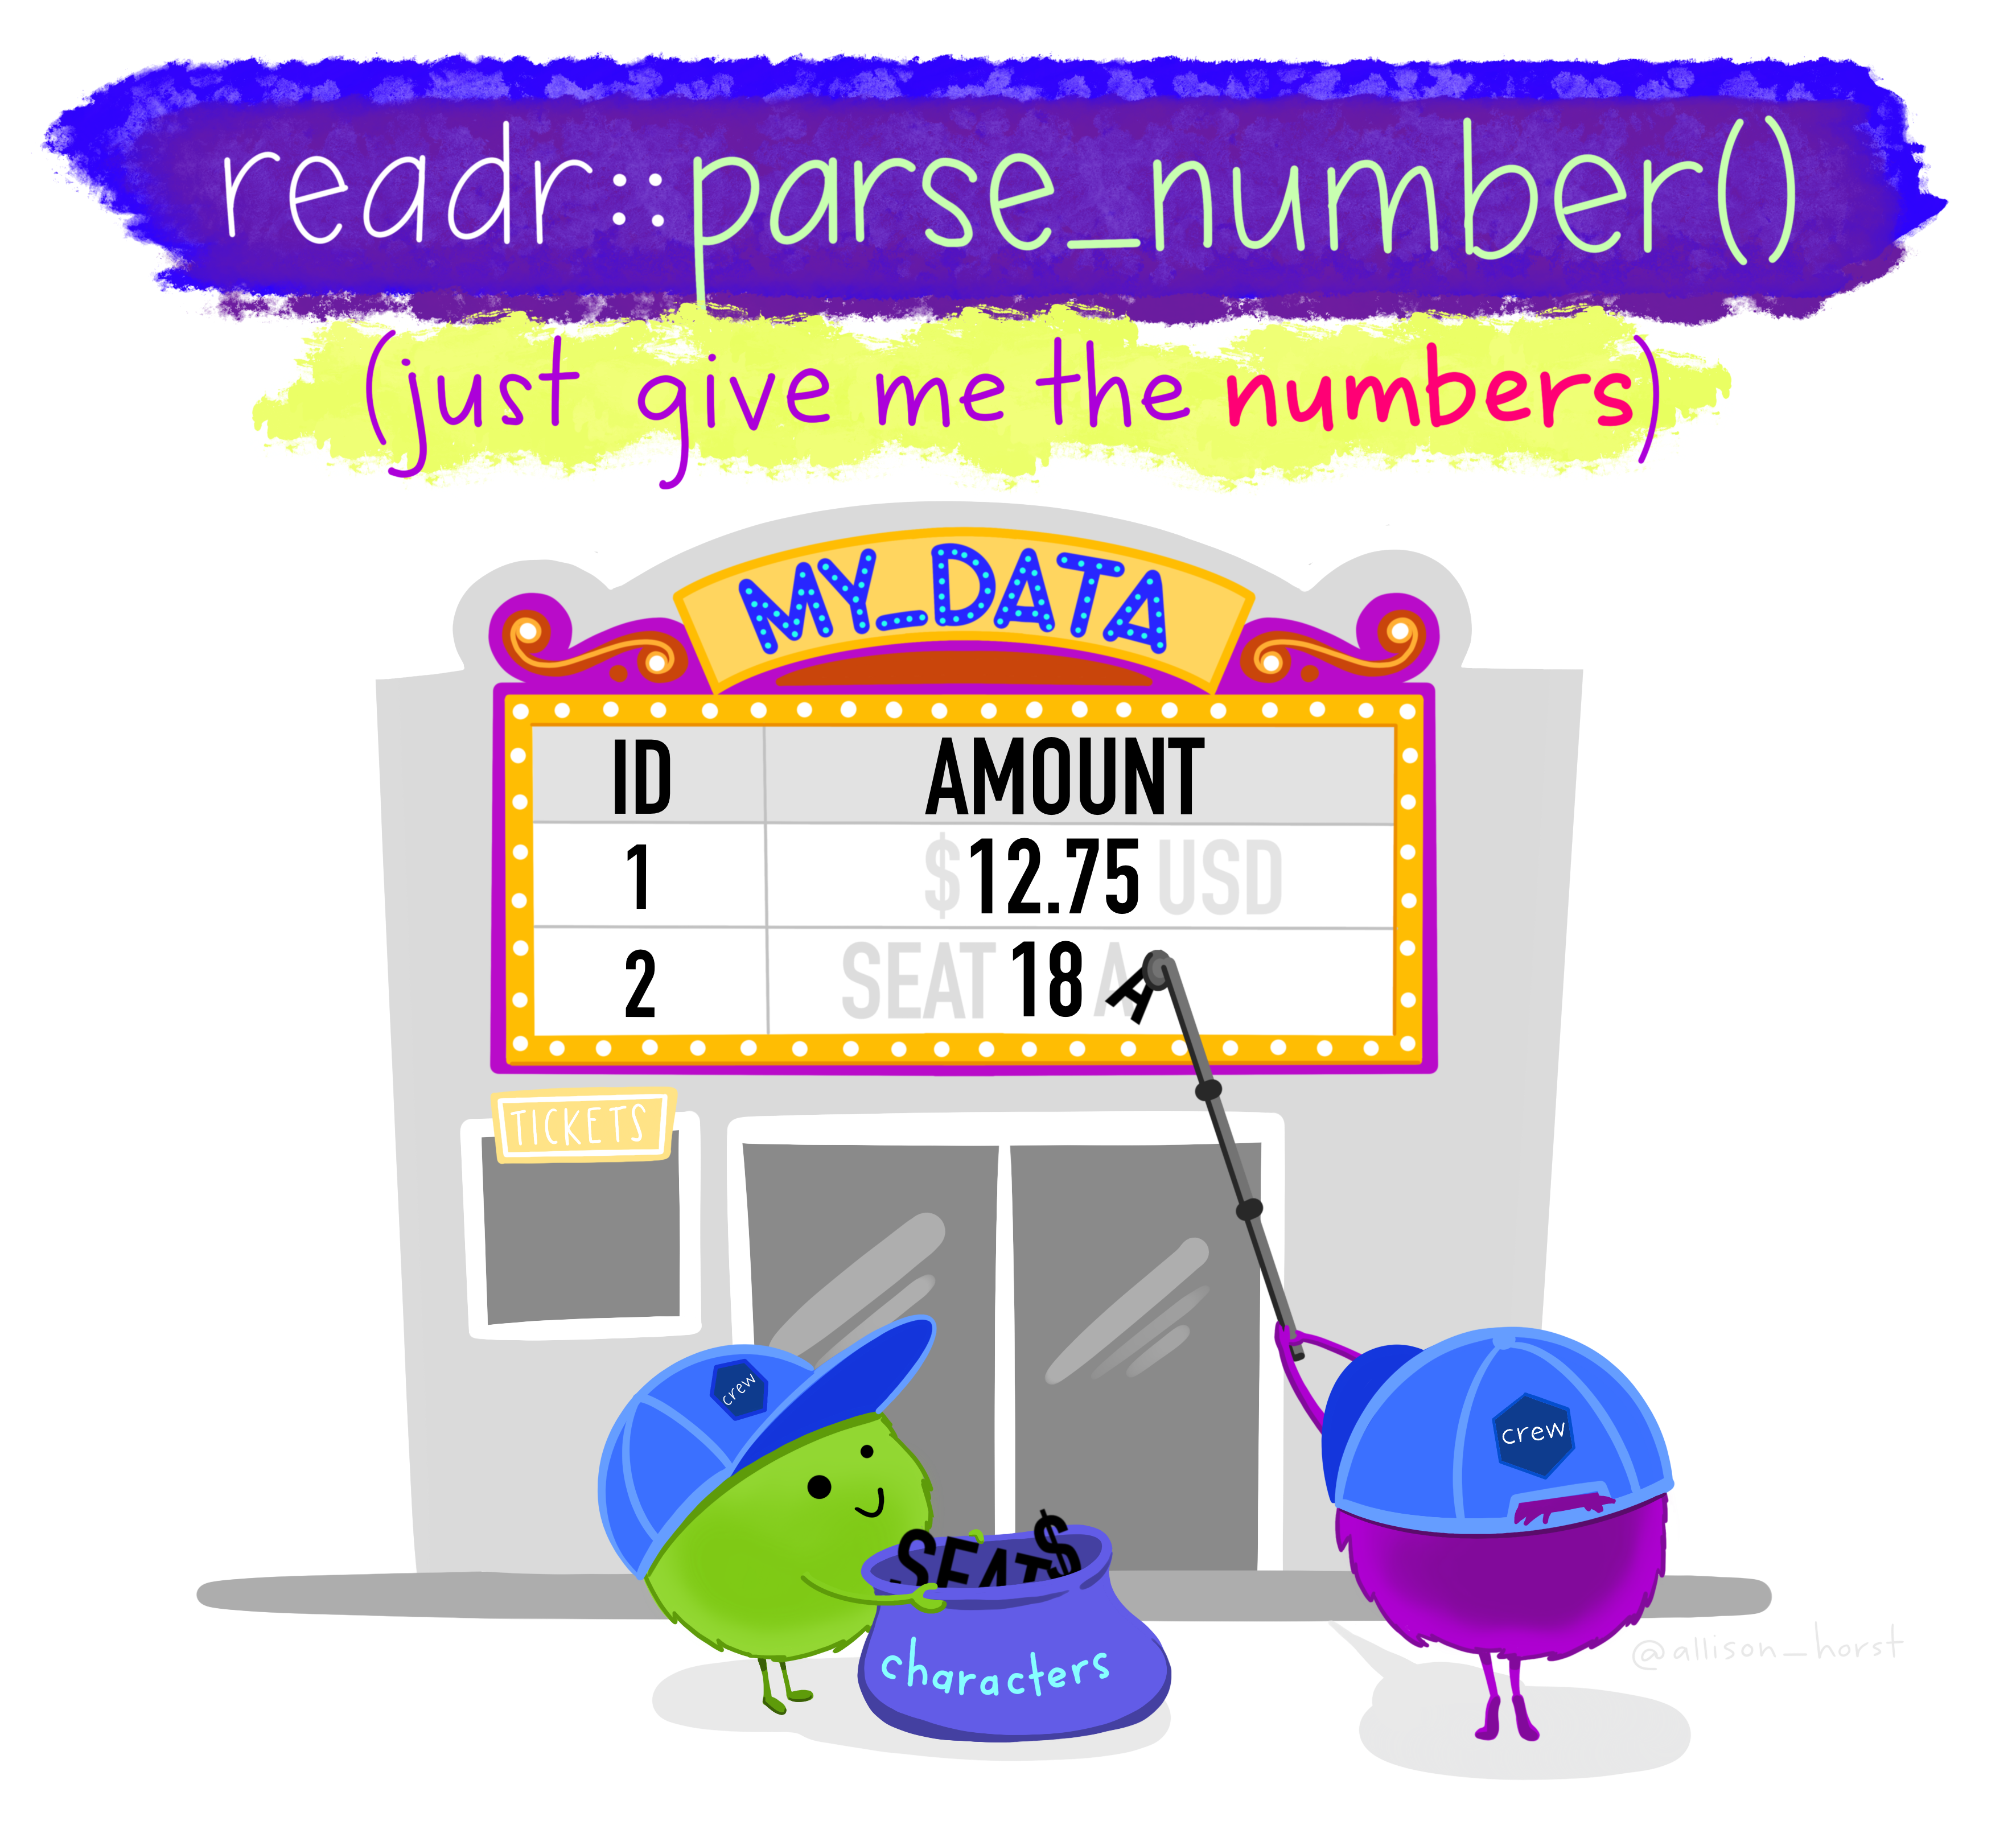 readr::parse_number() example. Source: [Allison Horst data science and stats illustrations](https://github.com/allisonhorst/stats-illustrations)